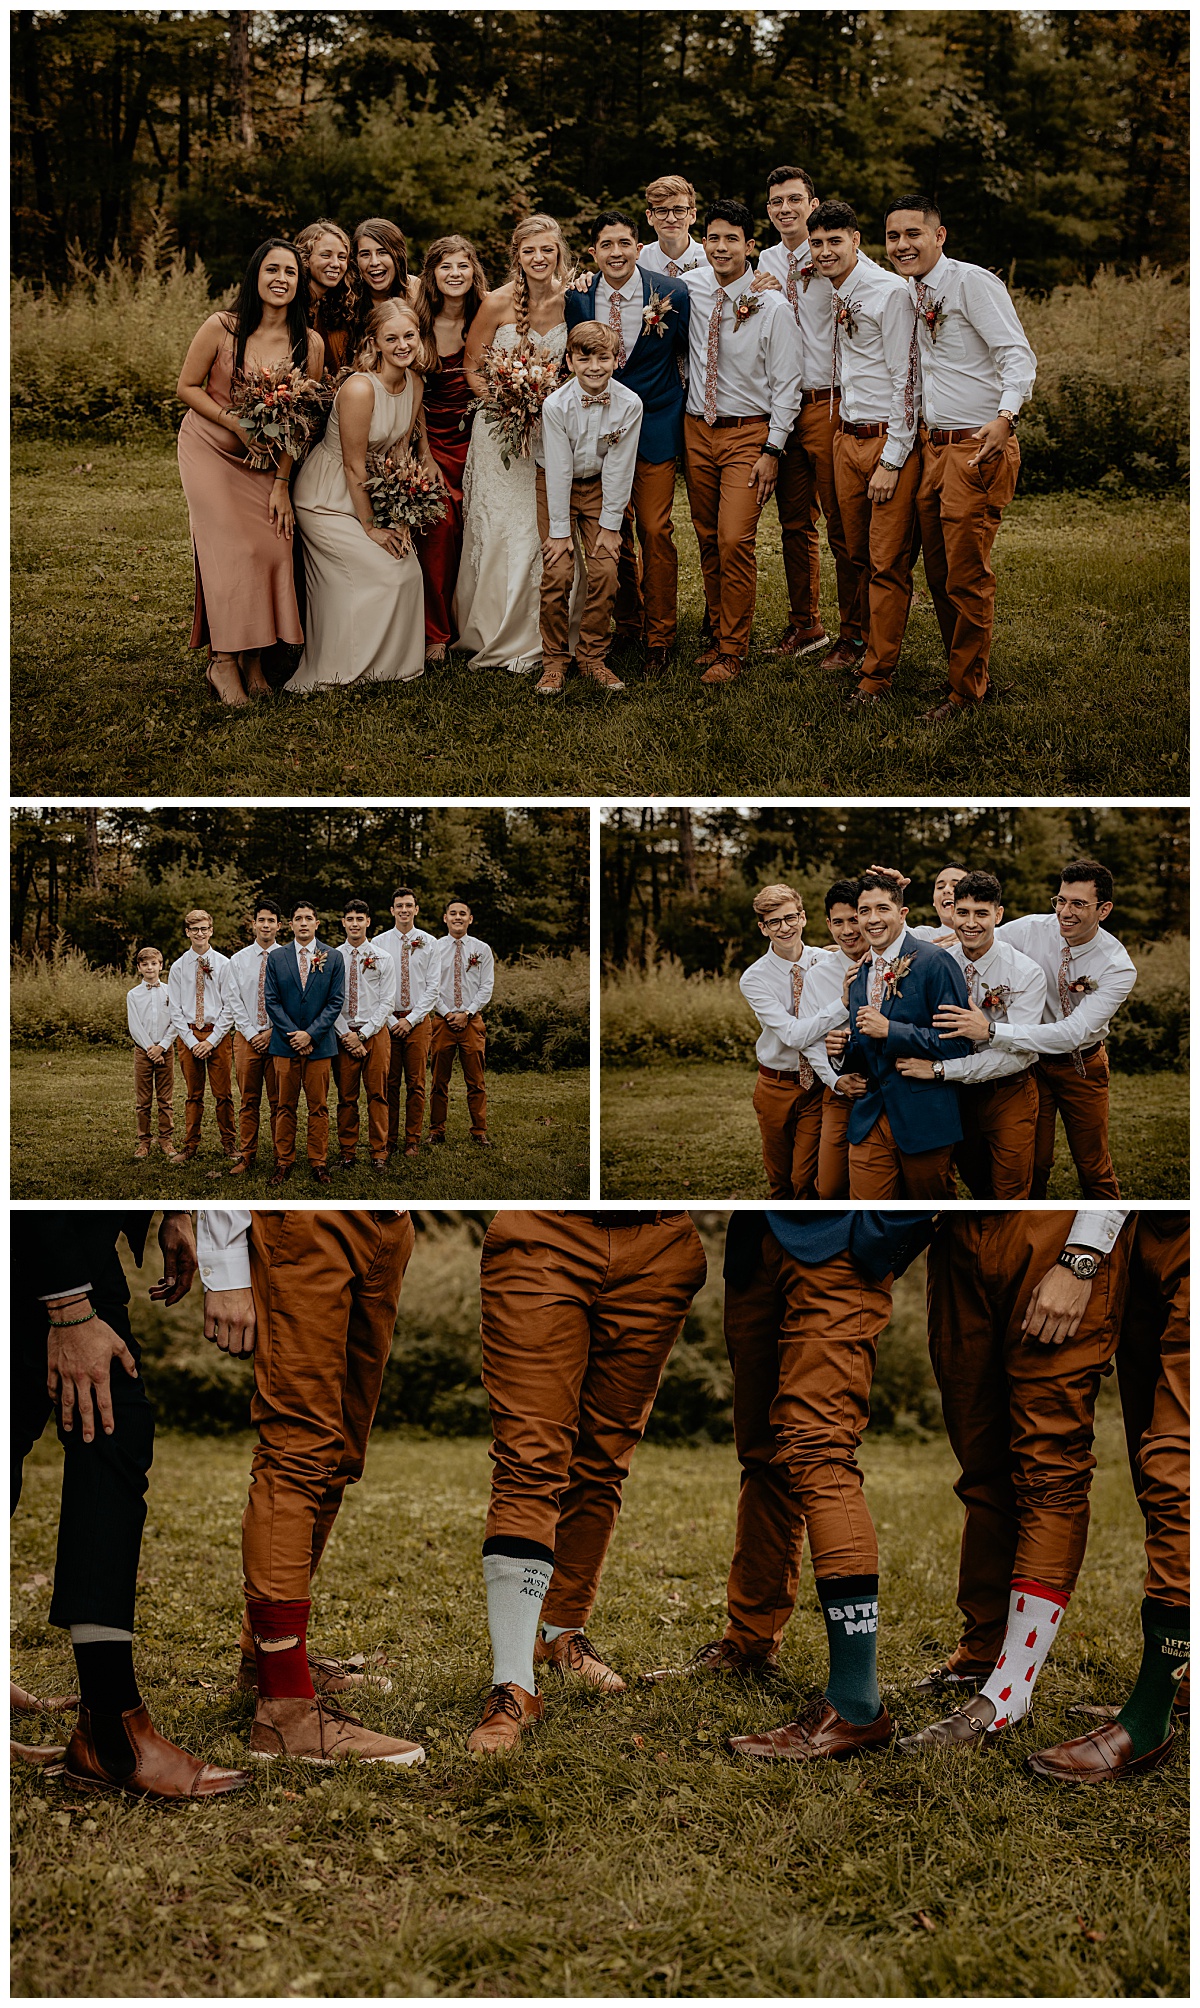 groomsmen stand together in field after intimate spiritual ceremony